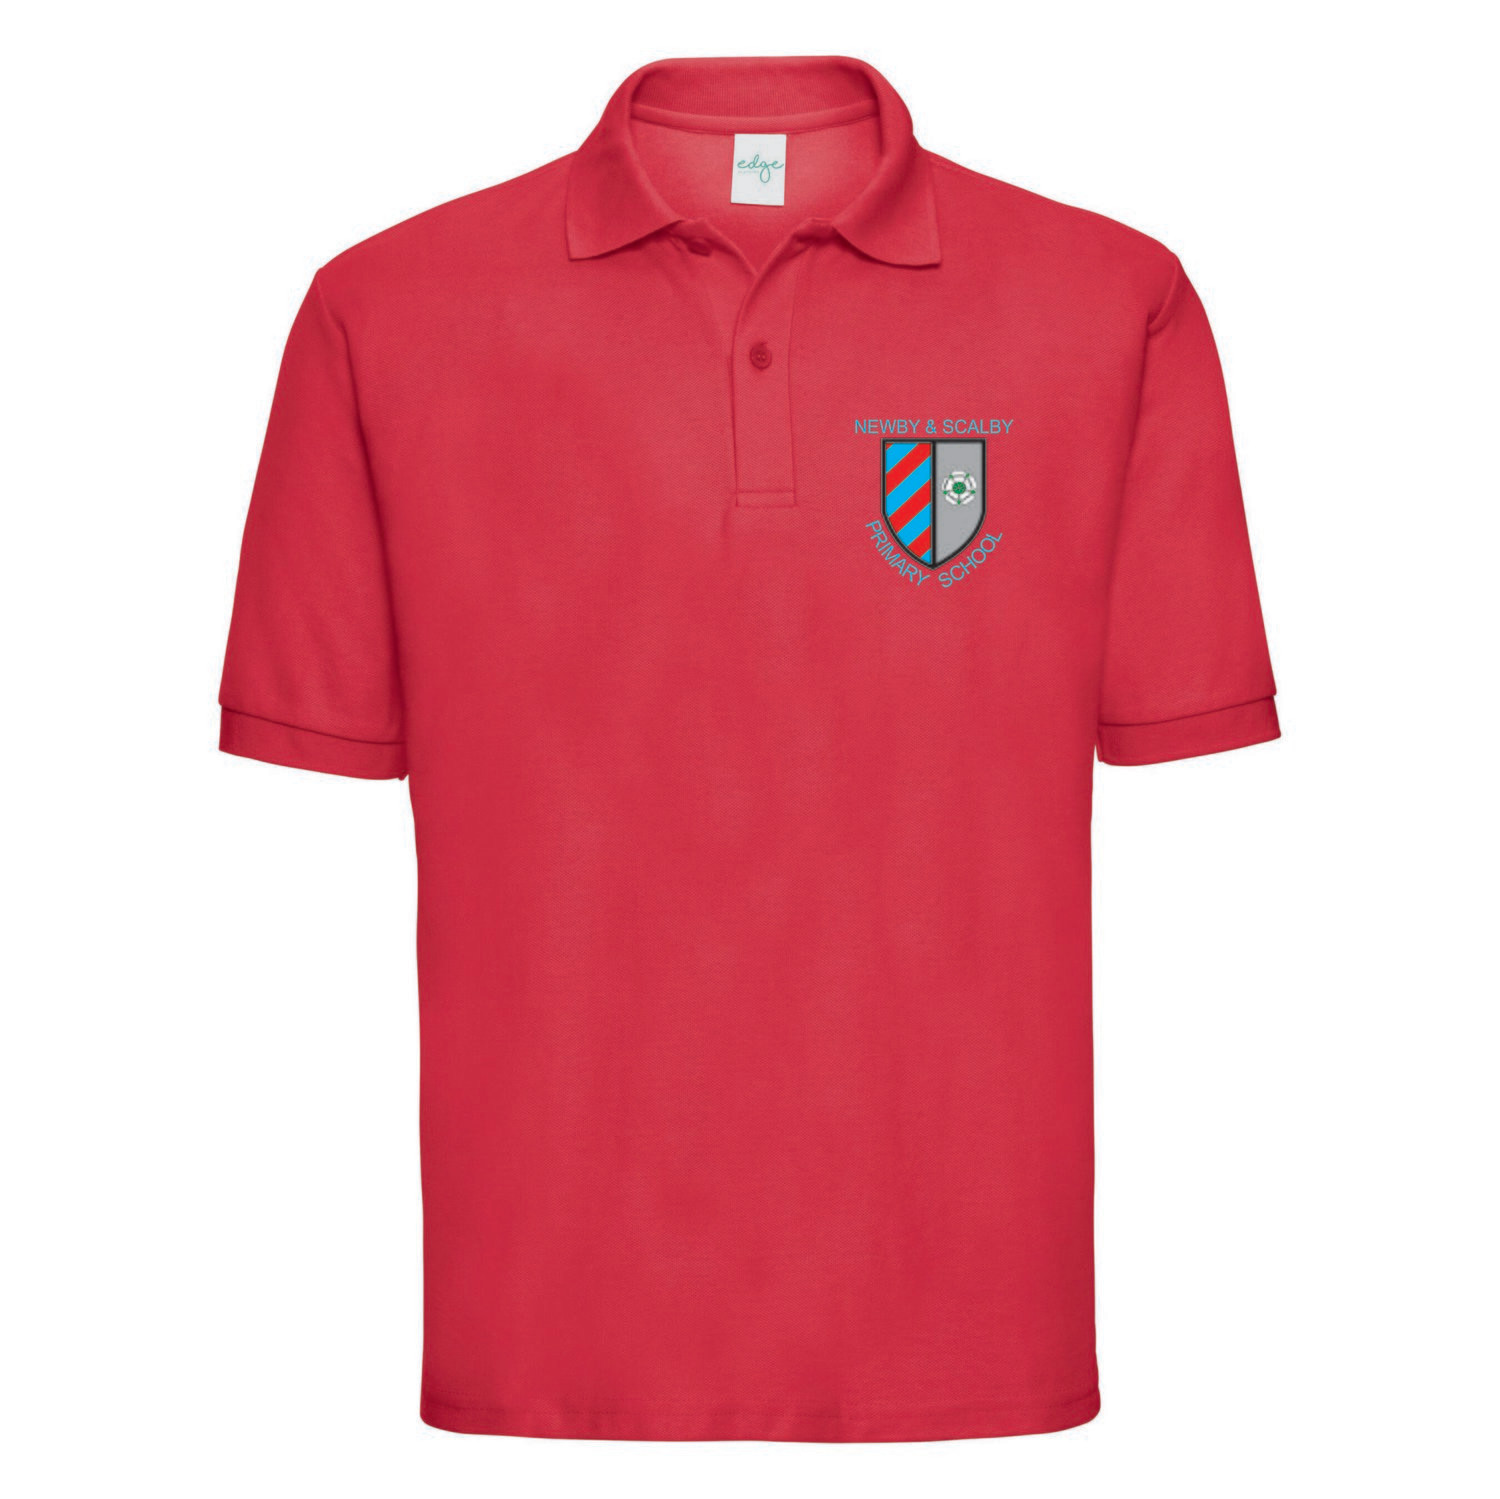 Newby & Scalby Red Polo Shirt